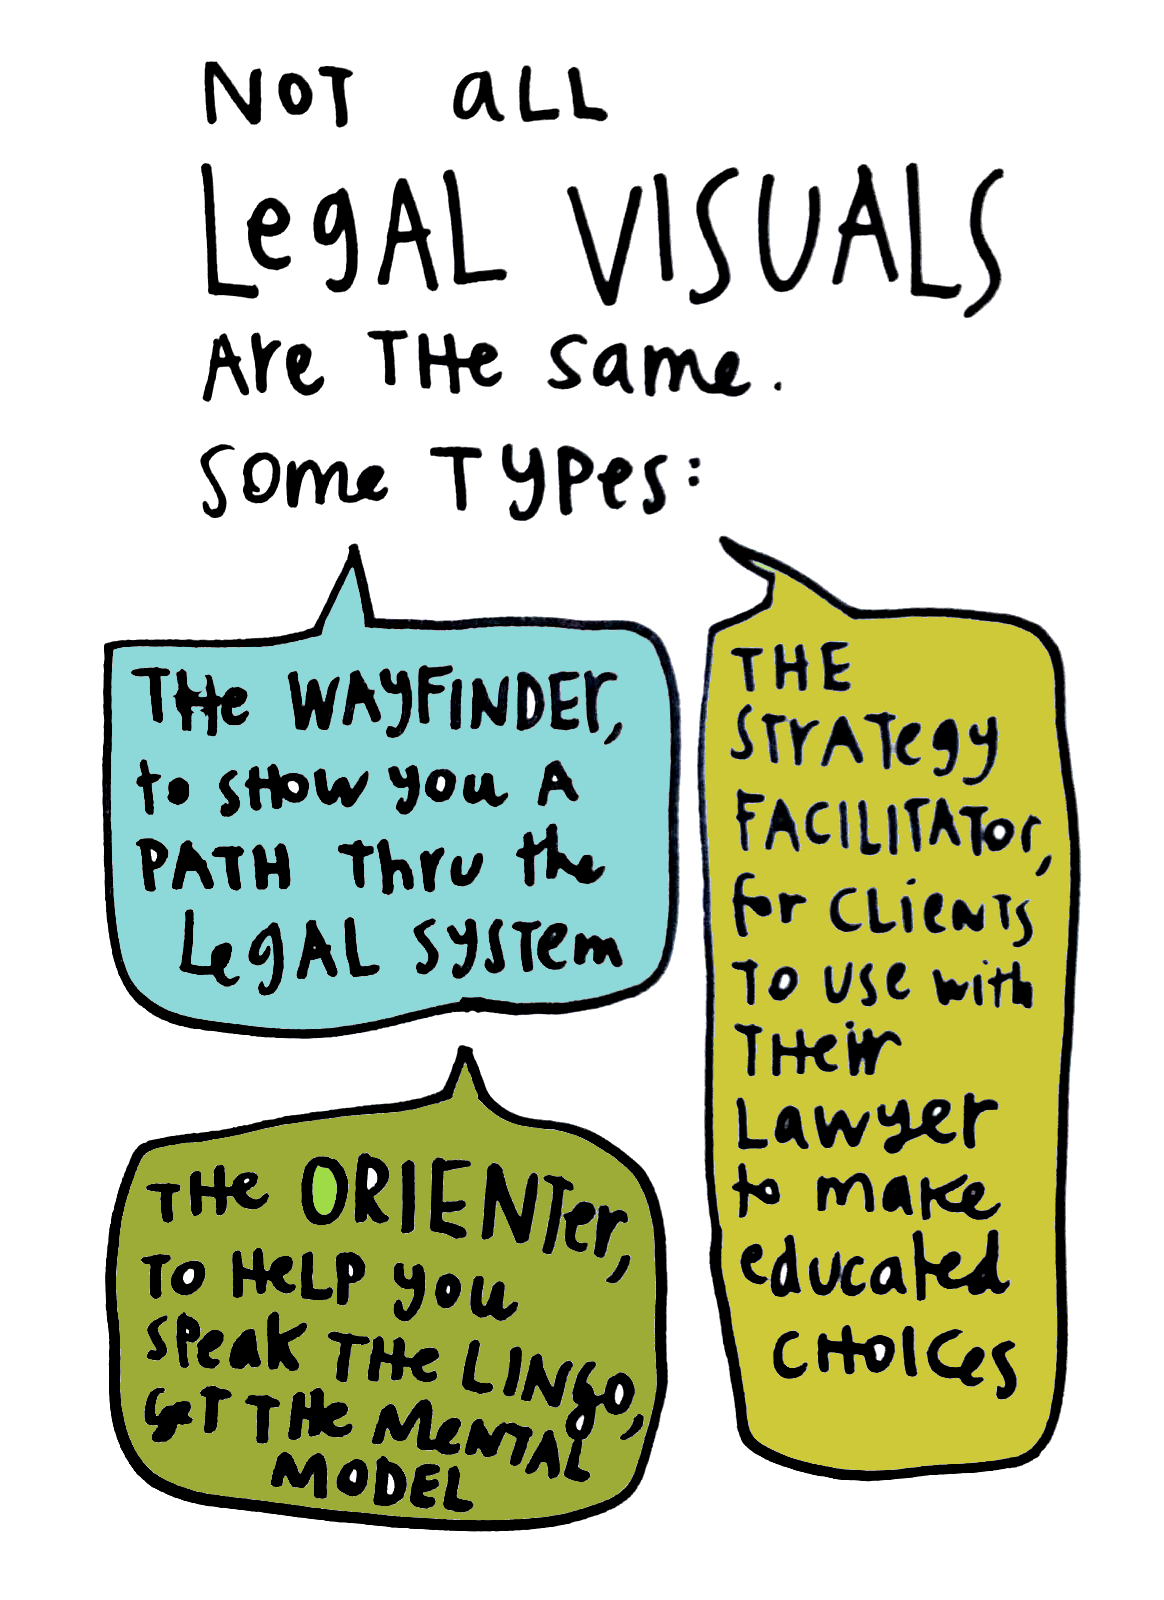 Visual Law Meetup takeaways - types of legal visuals